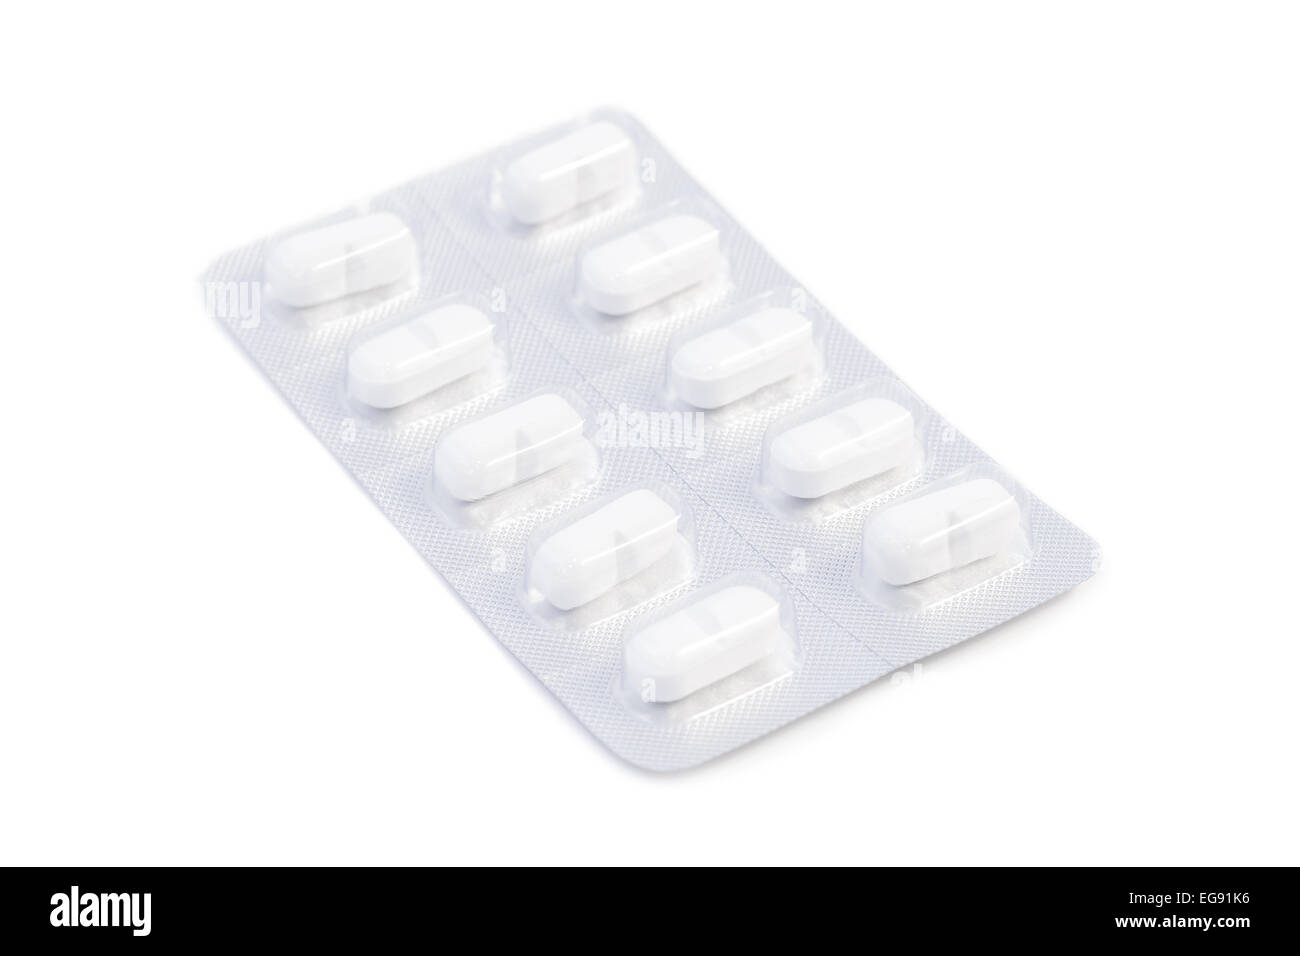 Closeup of white medicine pills in an unused blister pack, isolated on white background Stock Photo